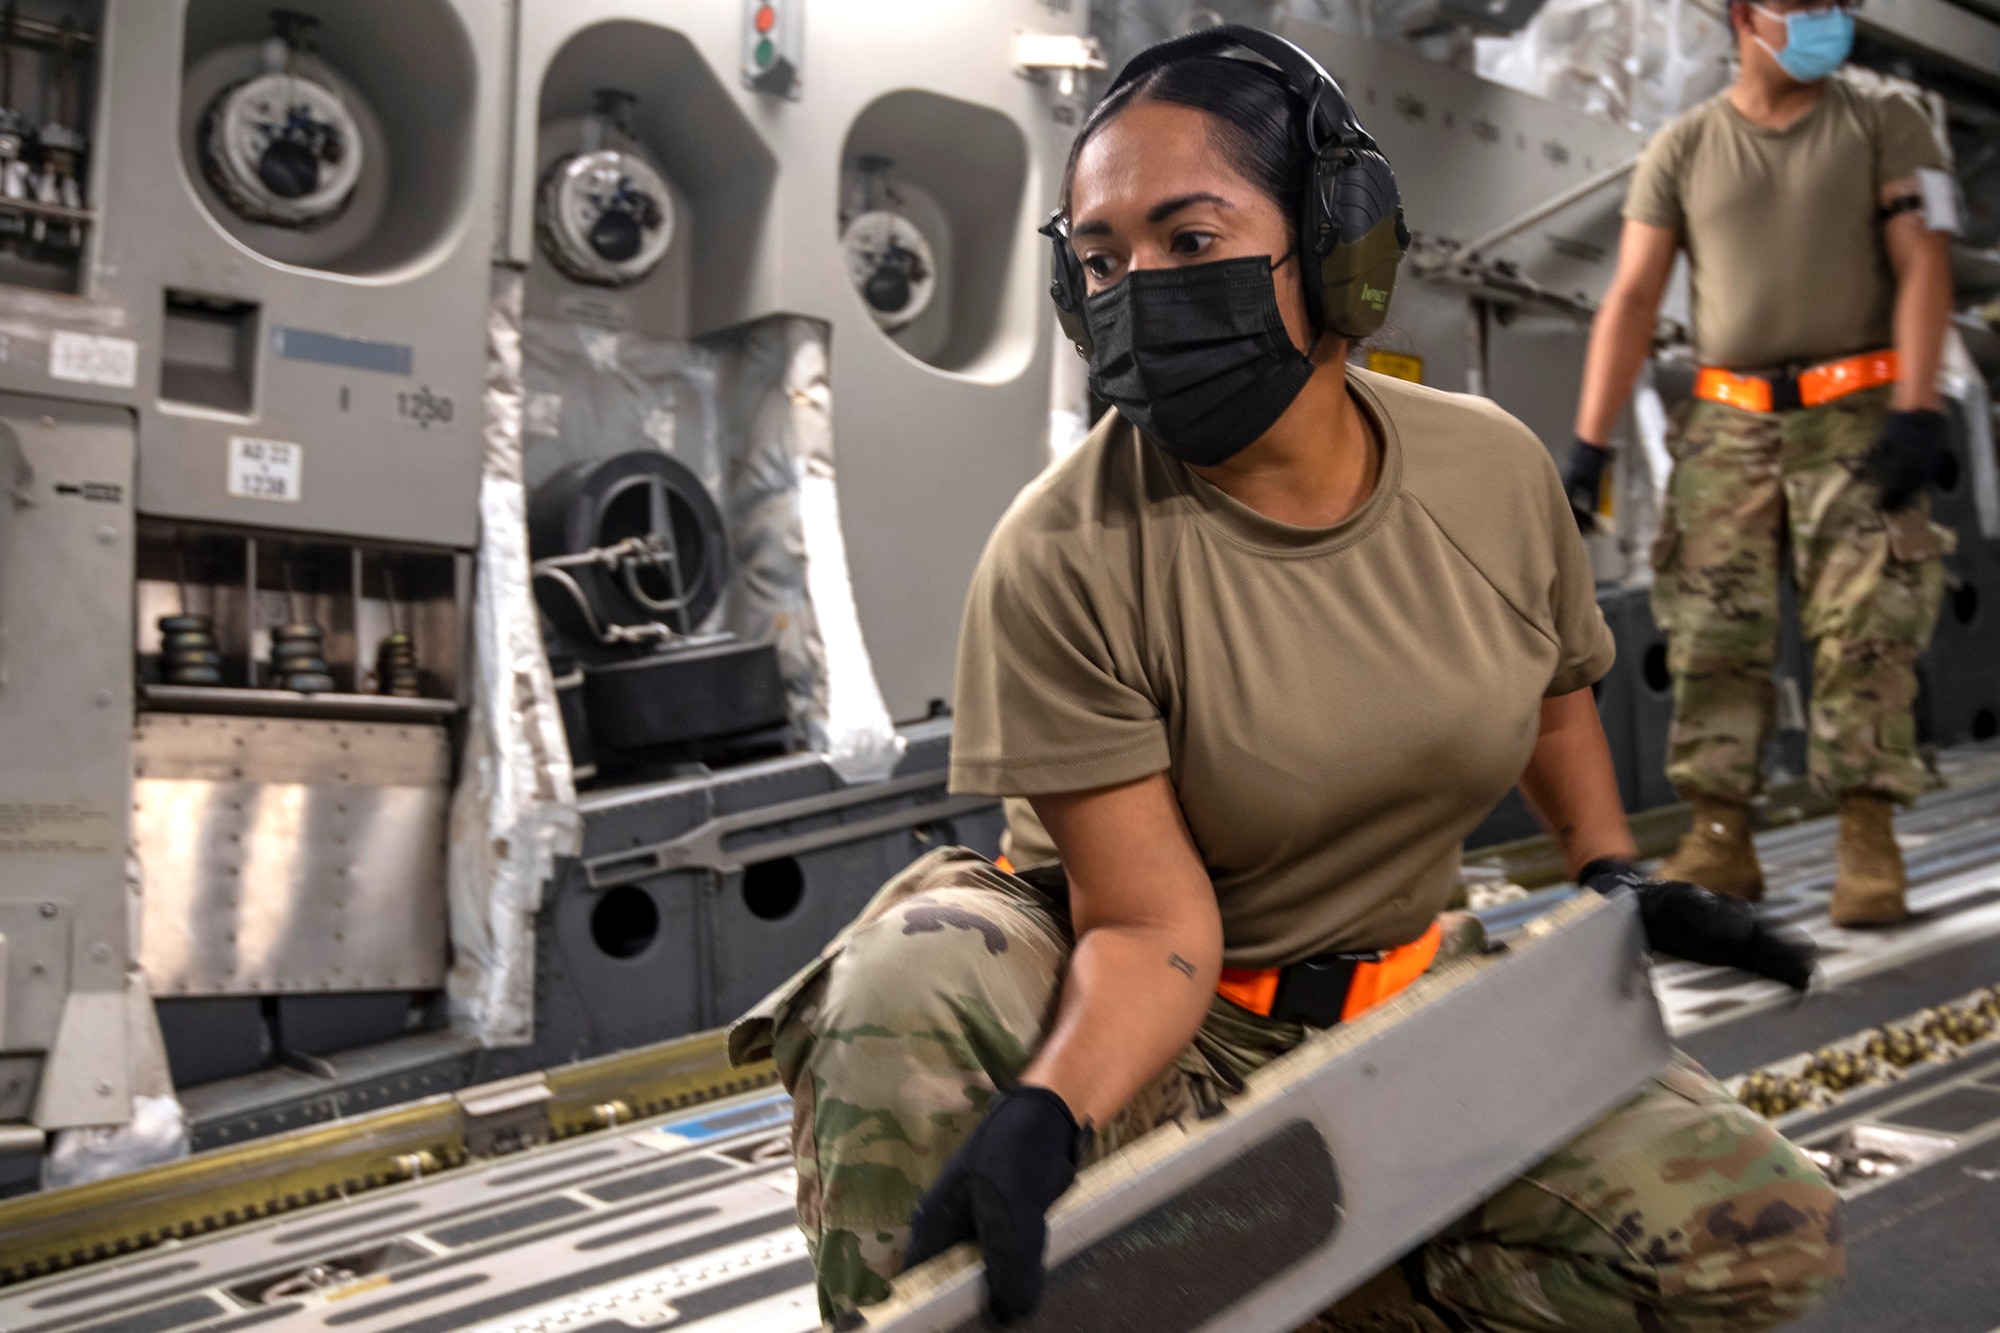 Senior Airman Nigeleene Eltagonde, 48th Aerial Port Squadron (APS), cargo specialist, reconfigures a Hawaii Air National Guard C-17 from the 154th Wing to receive cargo, while at Joint Base Pearl Harbor-Hickam, Jan. 20, 2022.